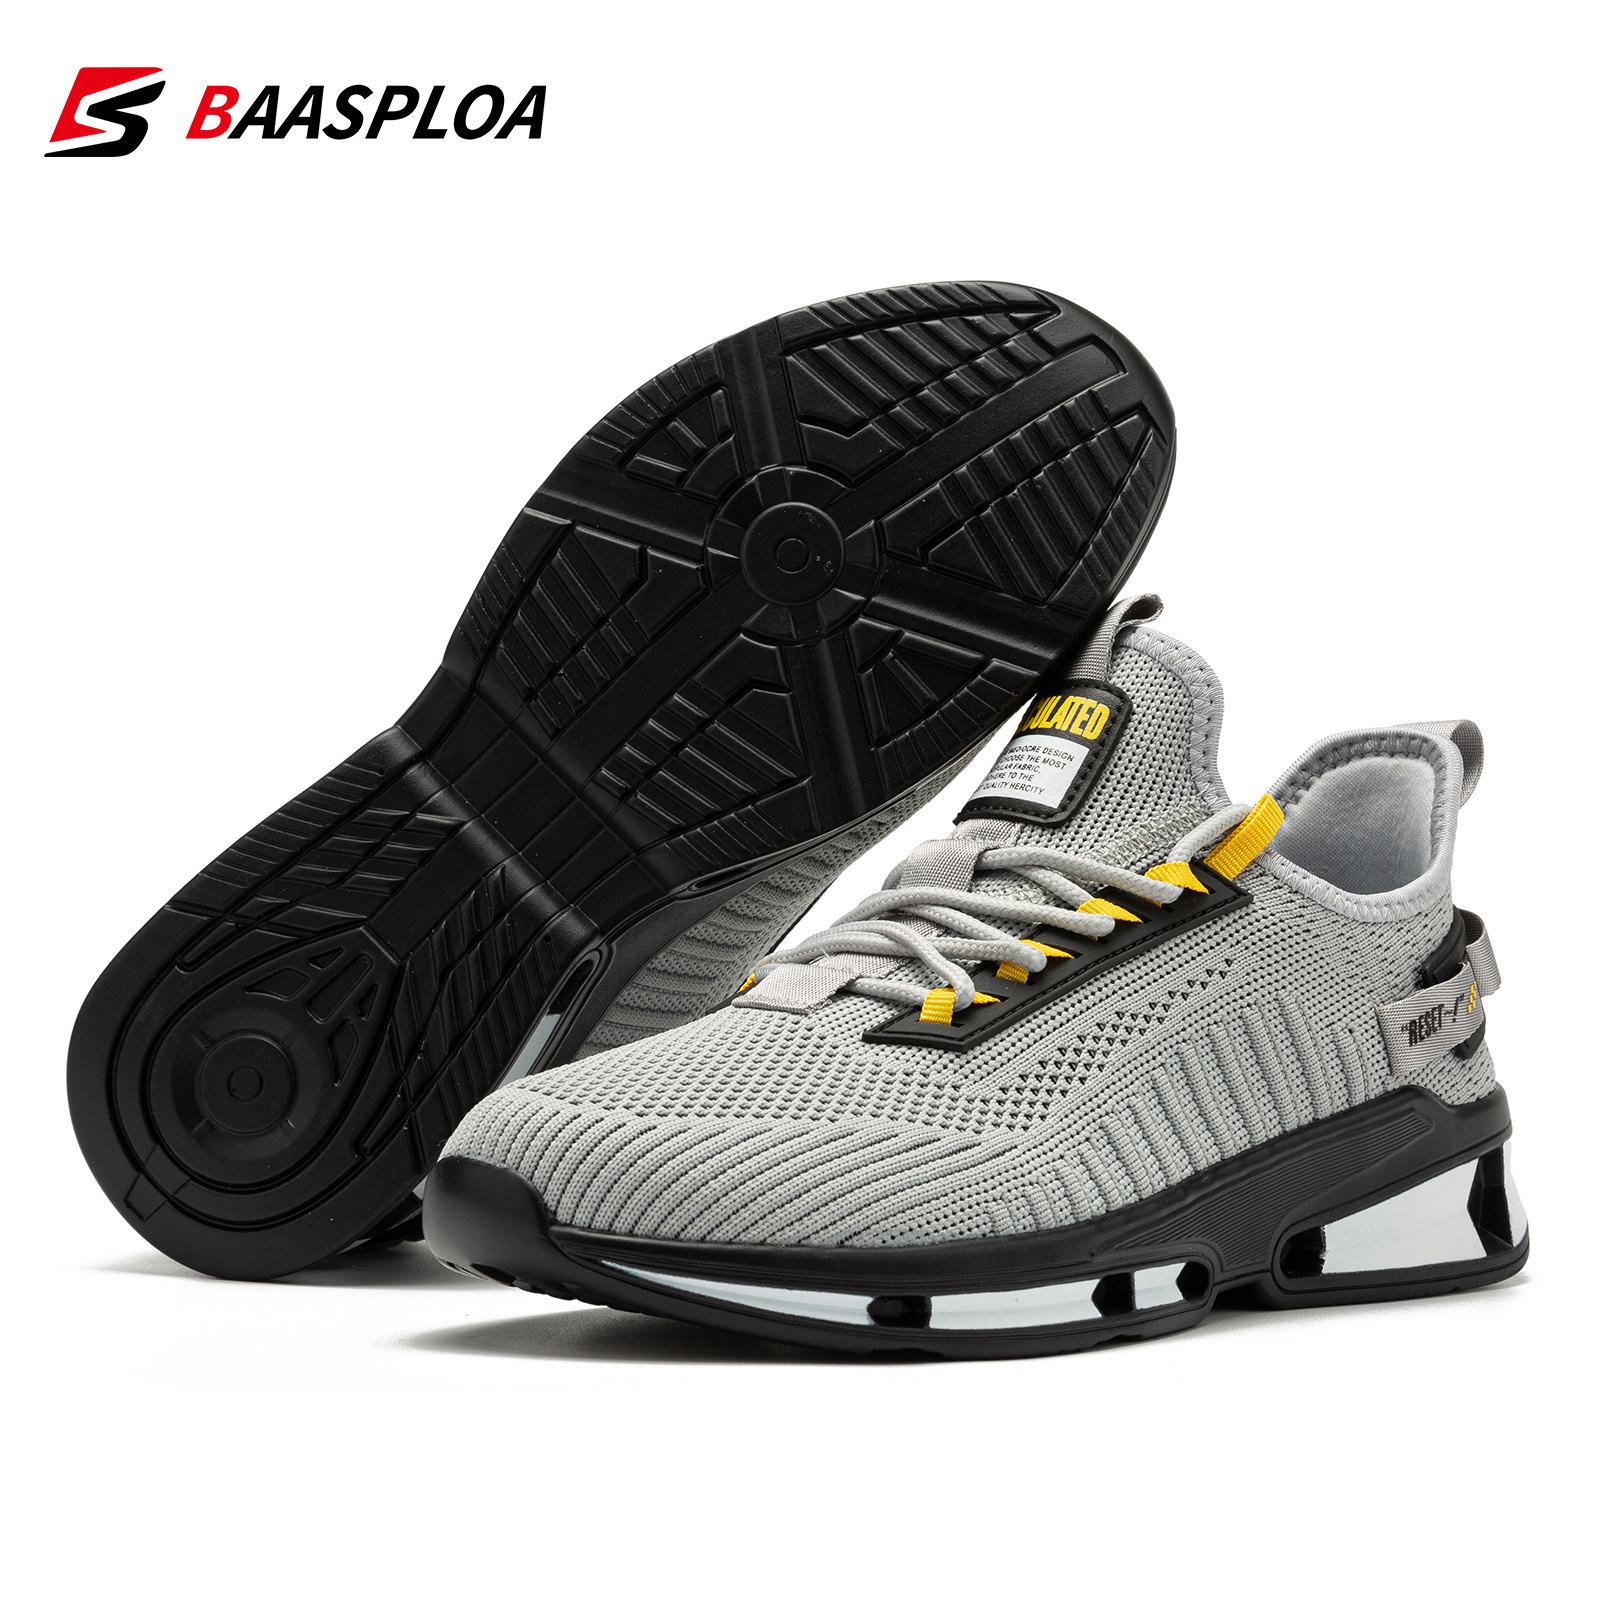 

Baasploa Men's Breathable Running Shoes, Shock Absorbing Trainers Sneakers